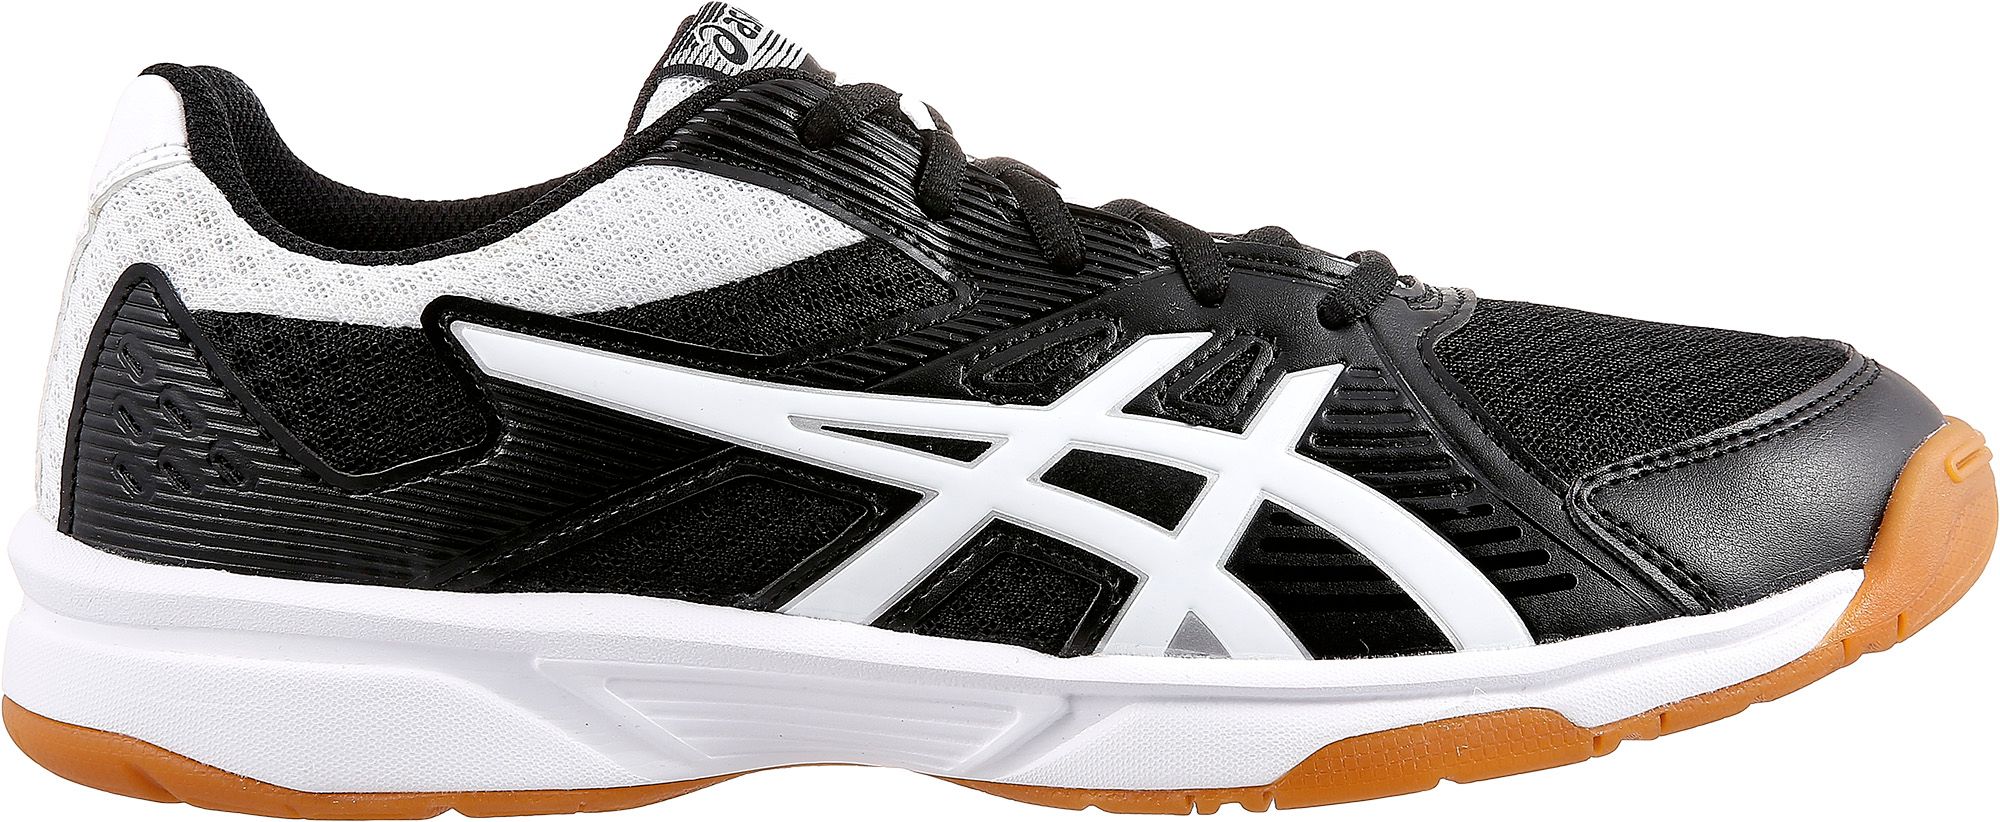 asics gel shoes for volleyball 